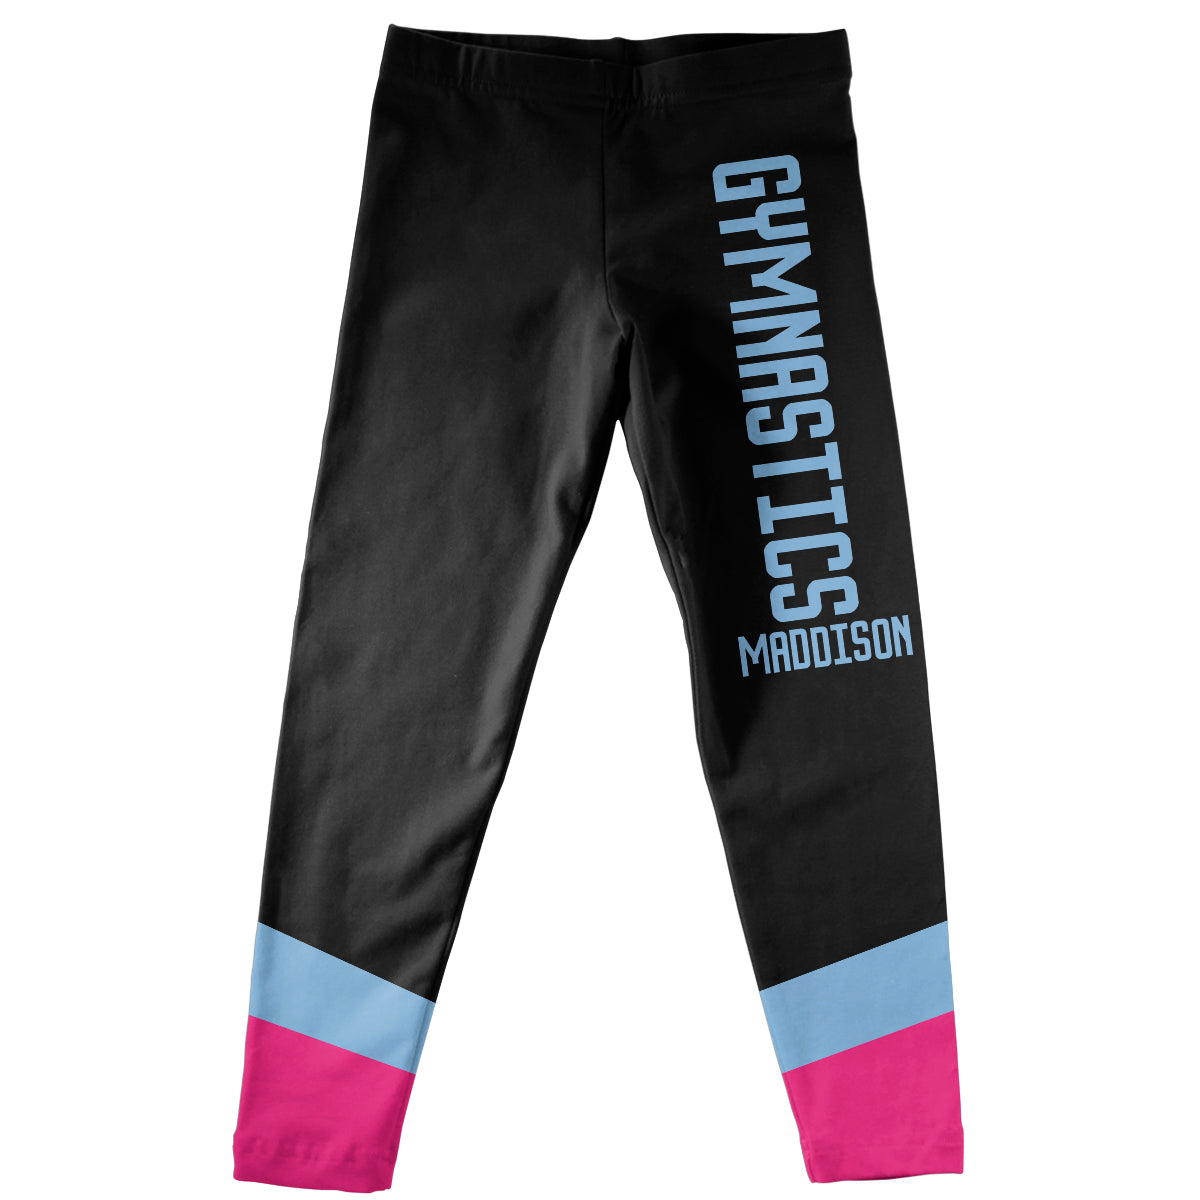 Black and light blue with pink gymnastics girls leggings with name - Wimziy&Co.